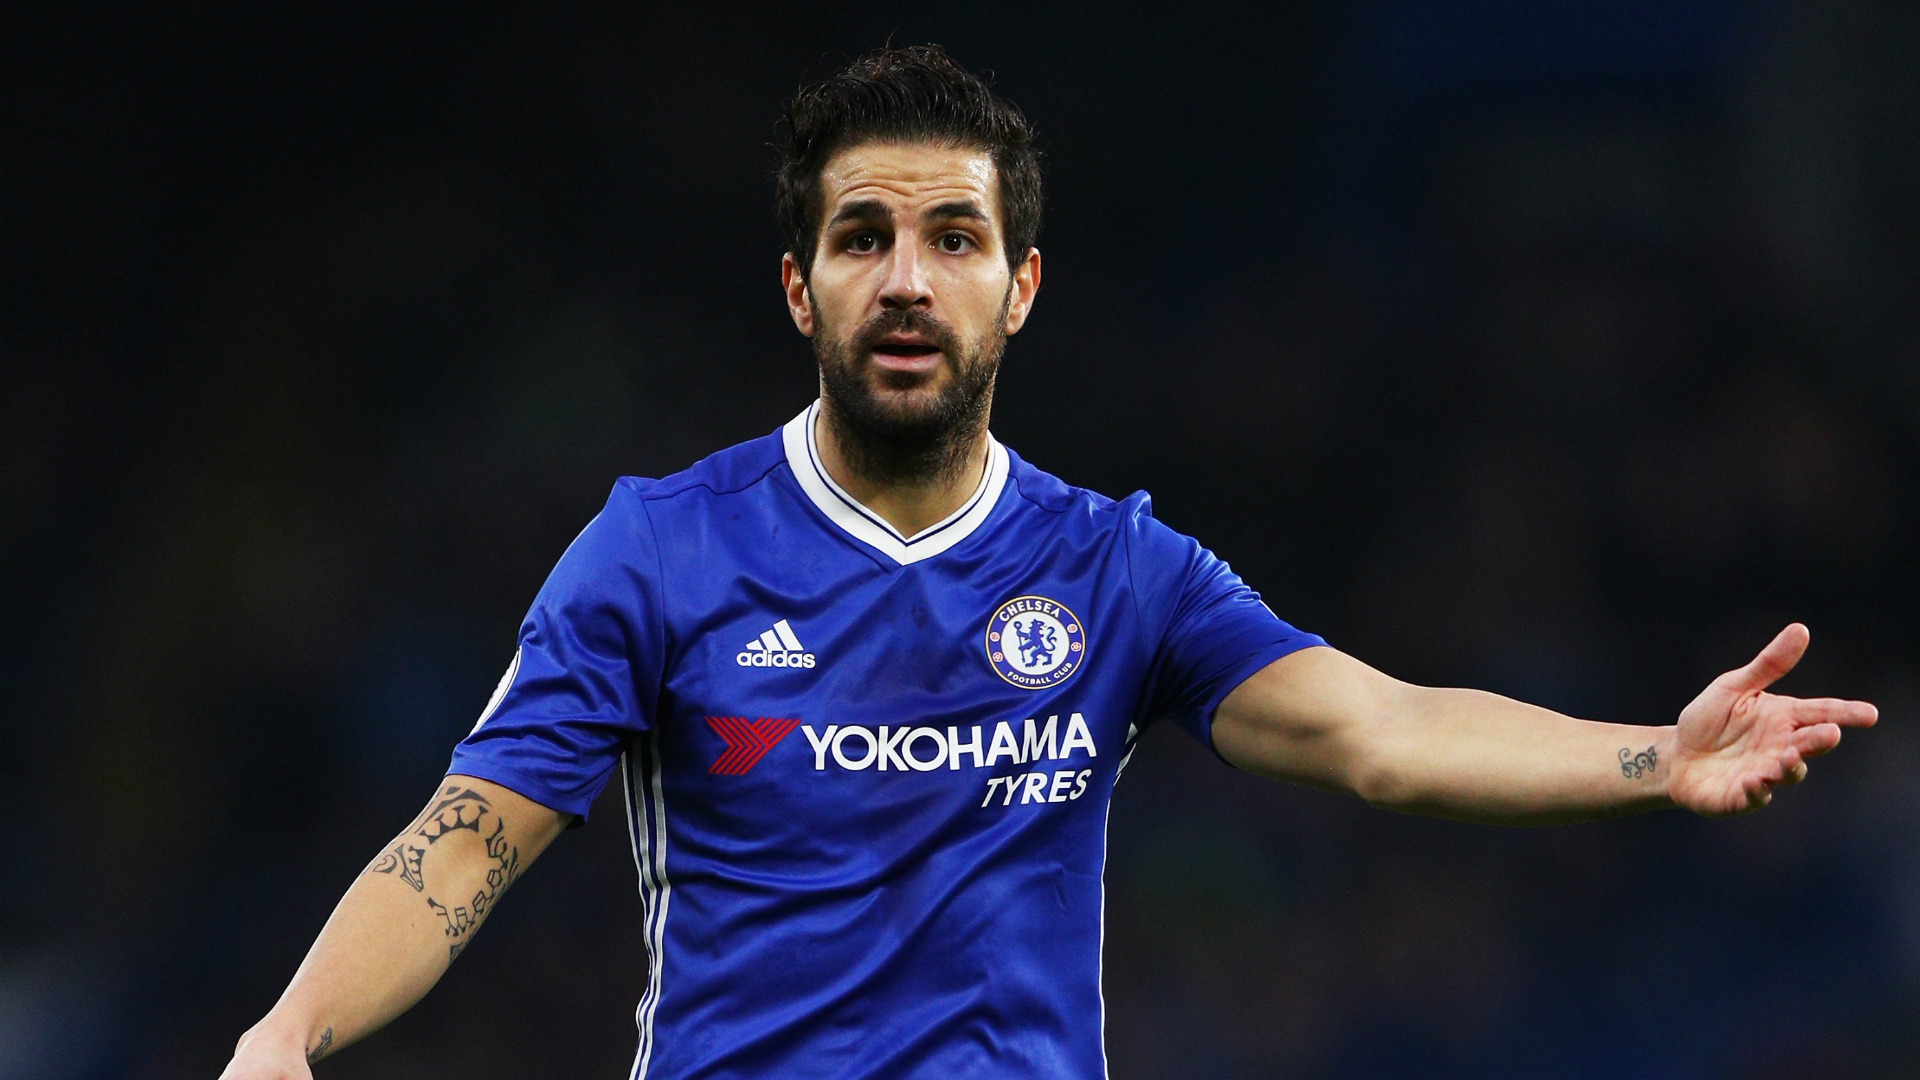 Image result for fabregas